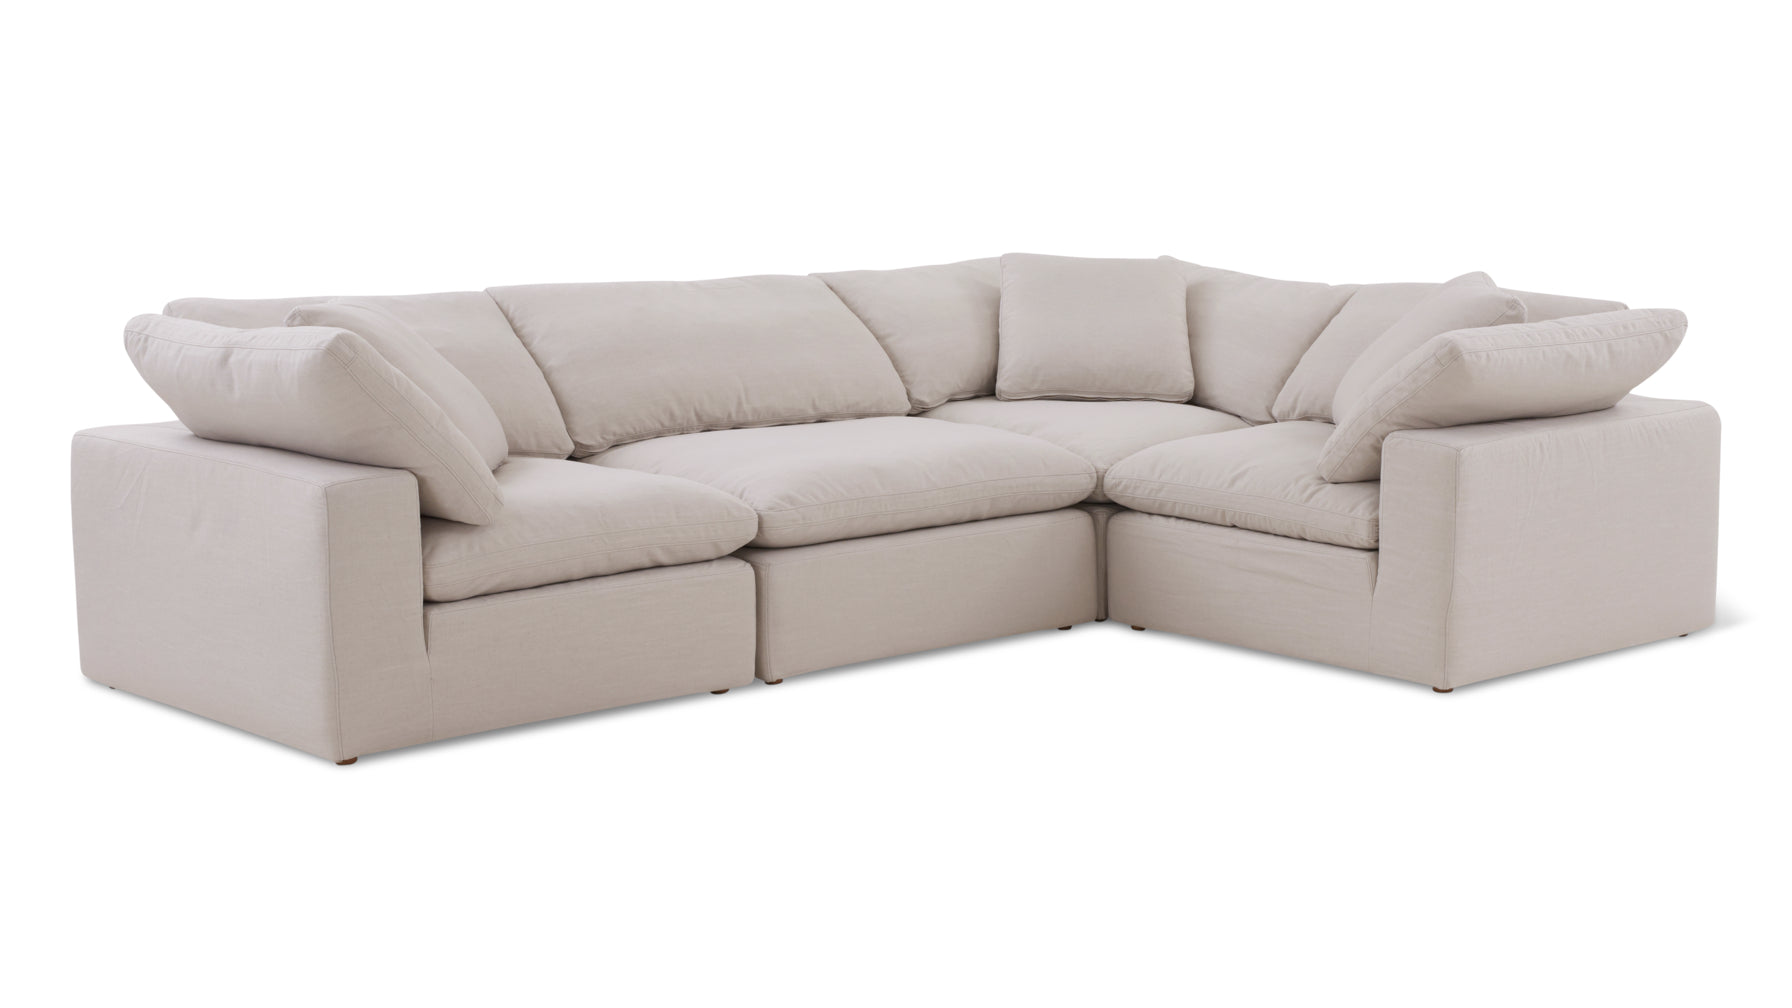 Movie Night™ 4-Piece Modular Sectional Closed, Standard, Clay - Image 4